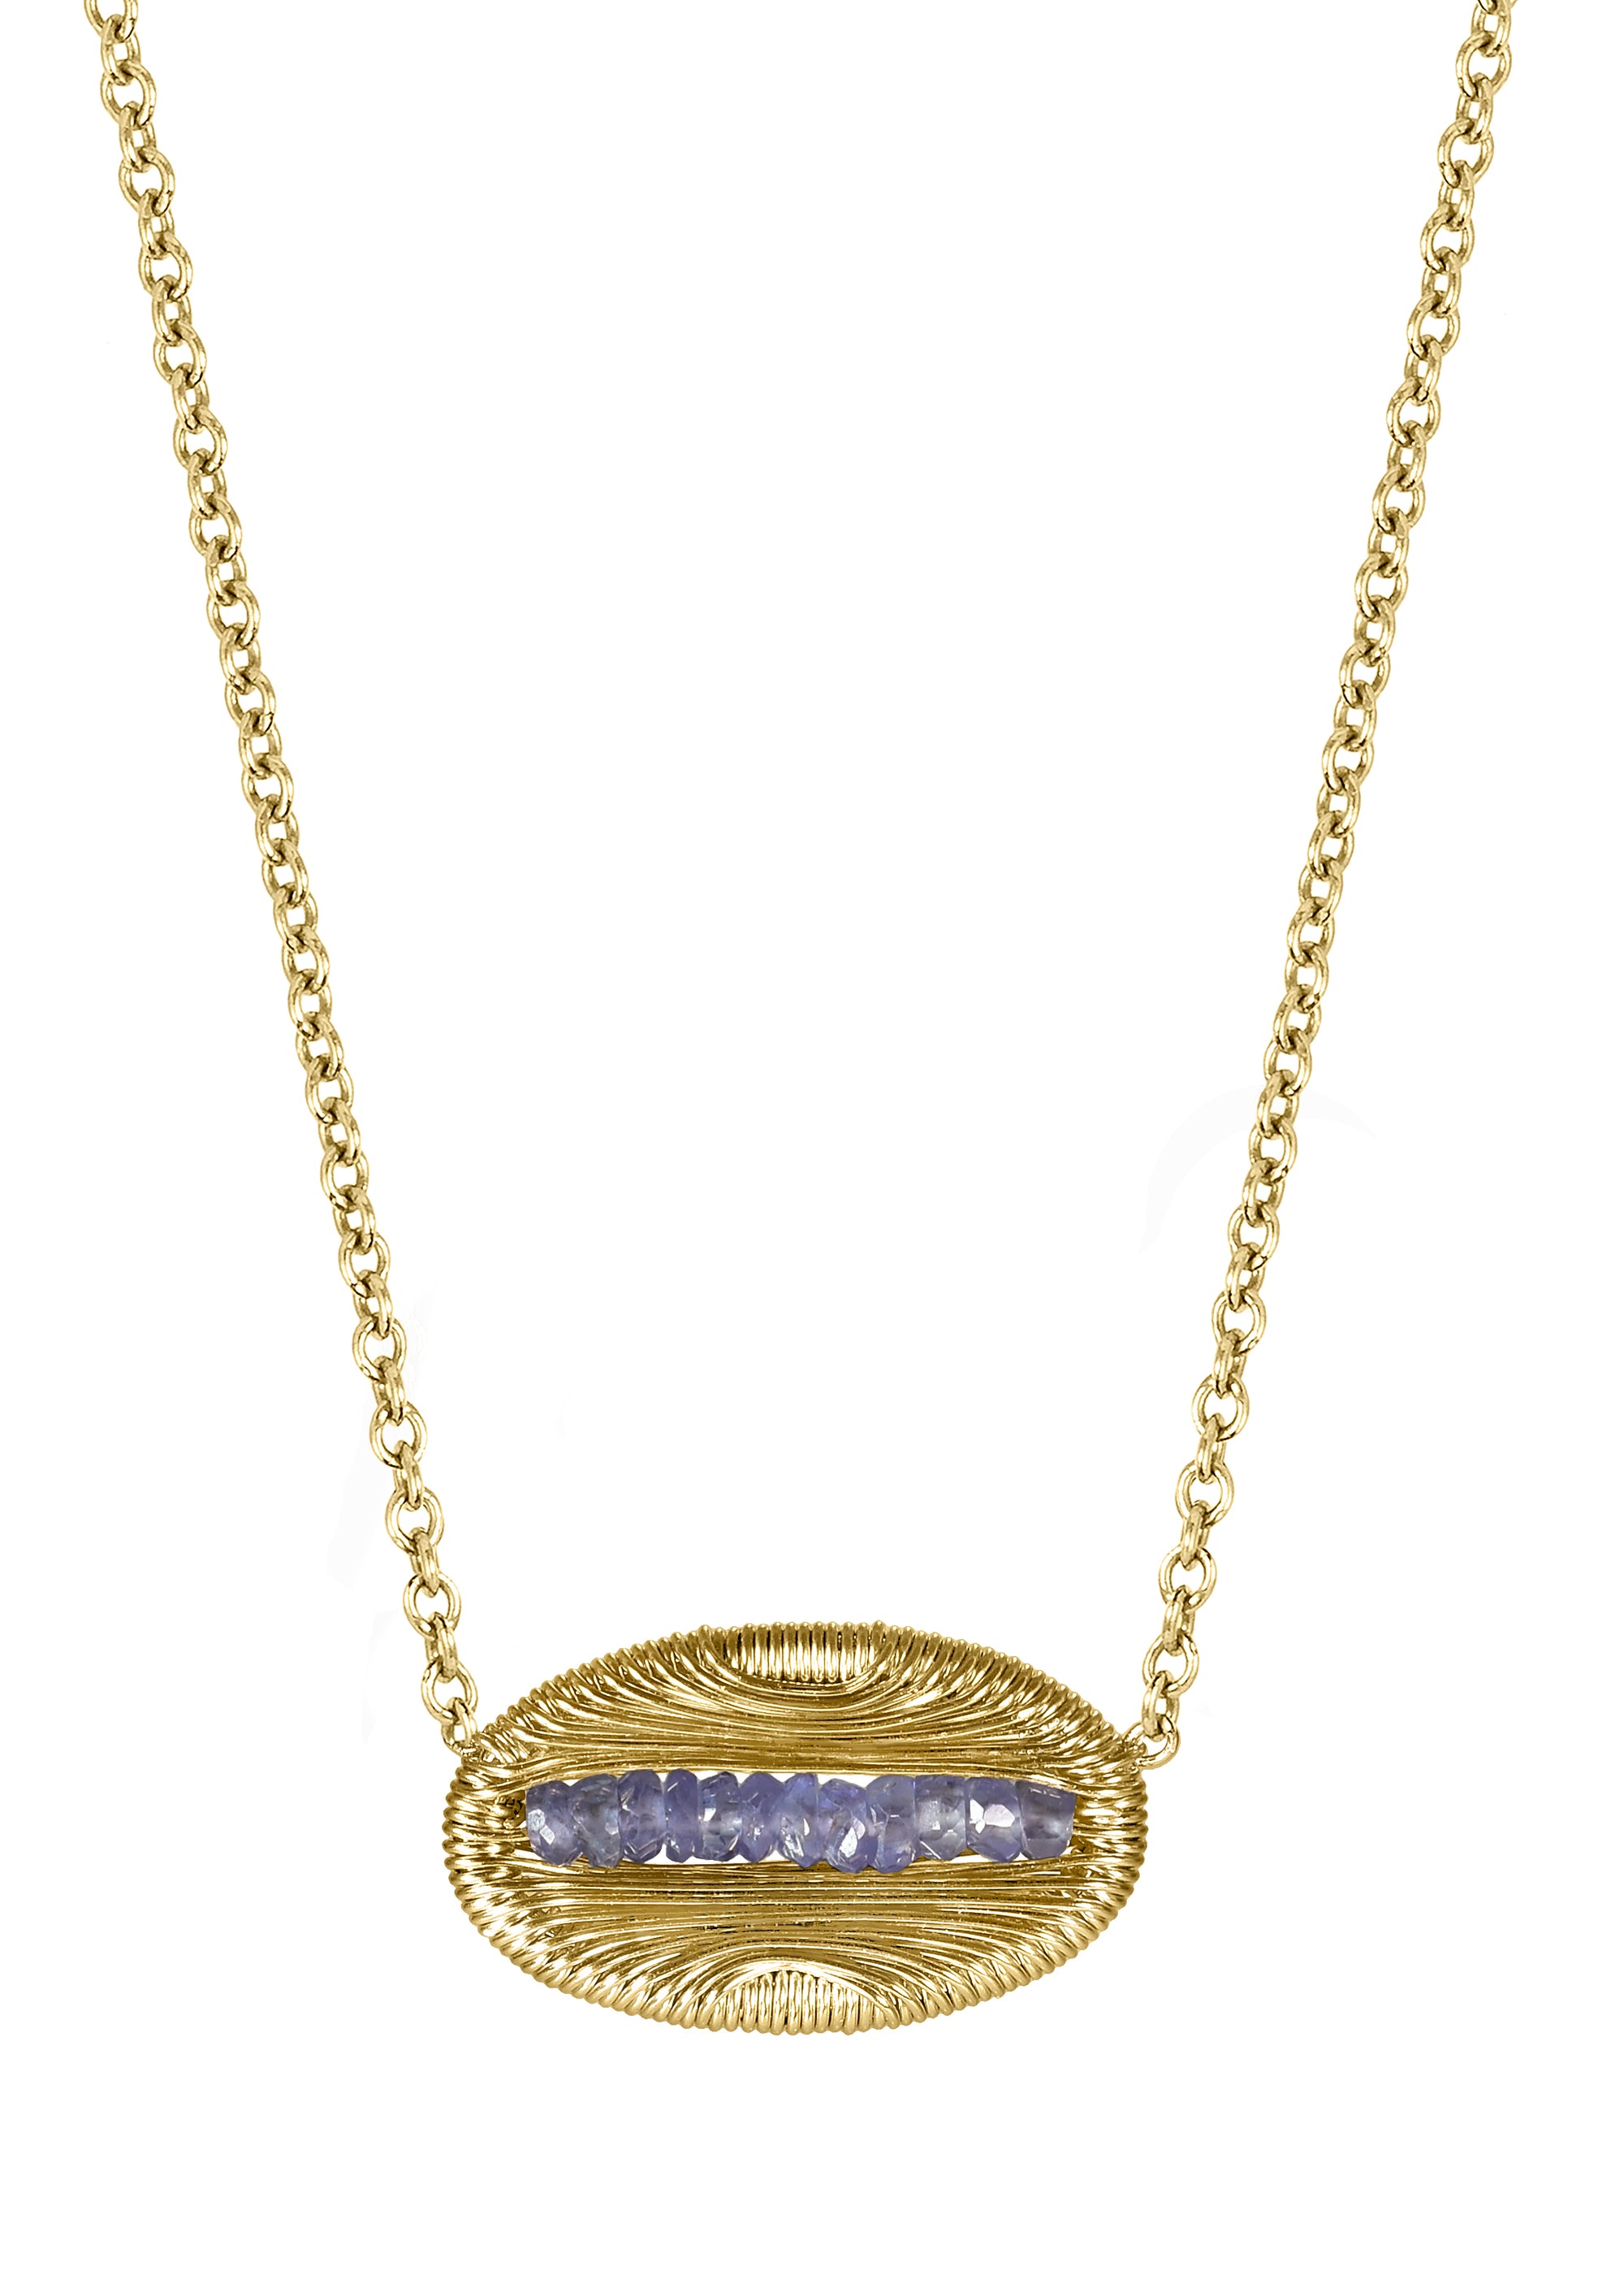 Blue sapphire 14k gold fill Necklace measures 16" in length Pendant measures 3/8" in length and 5/8" in width Handmade in our Los Angeles studio